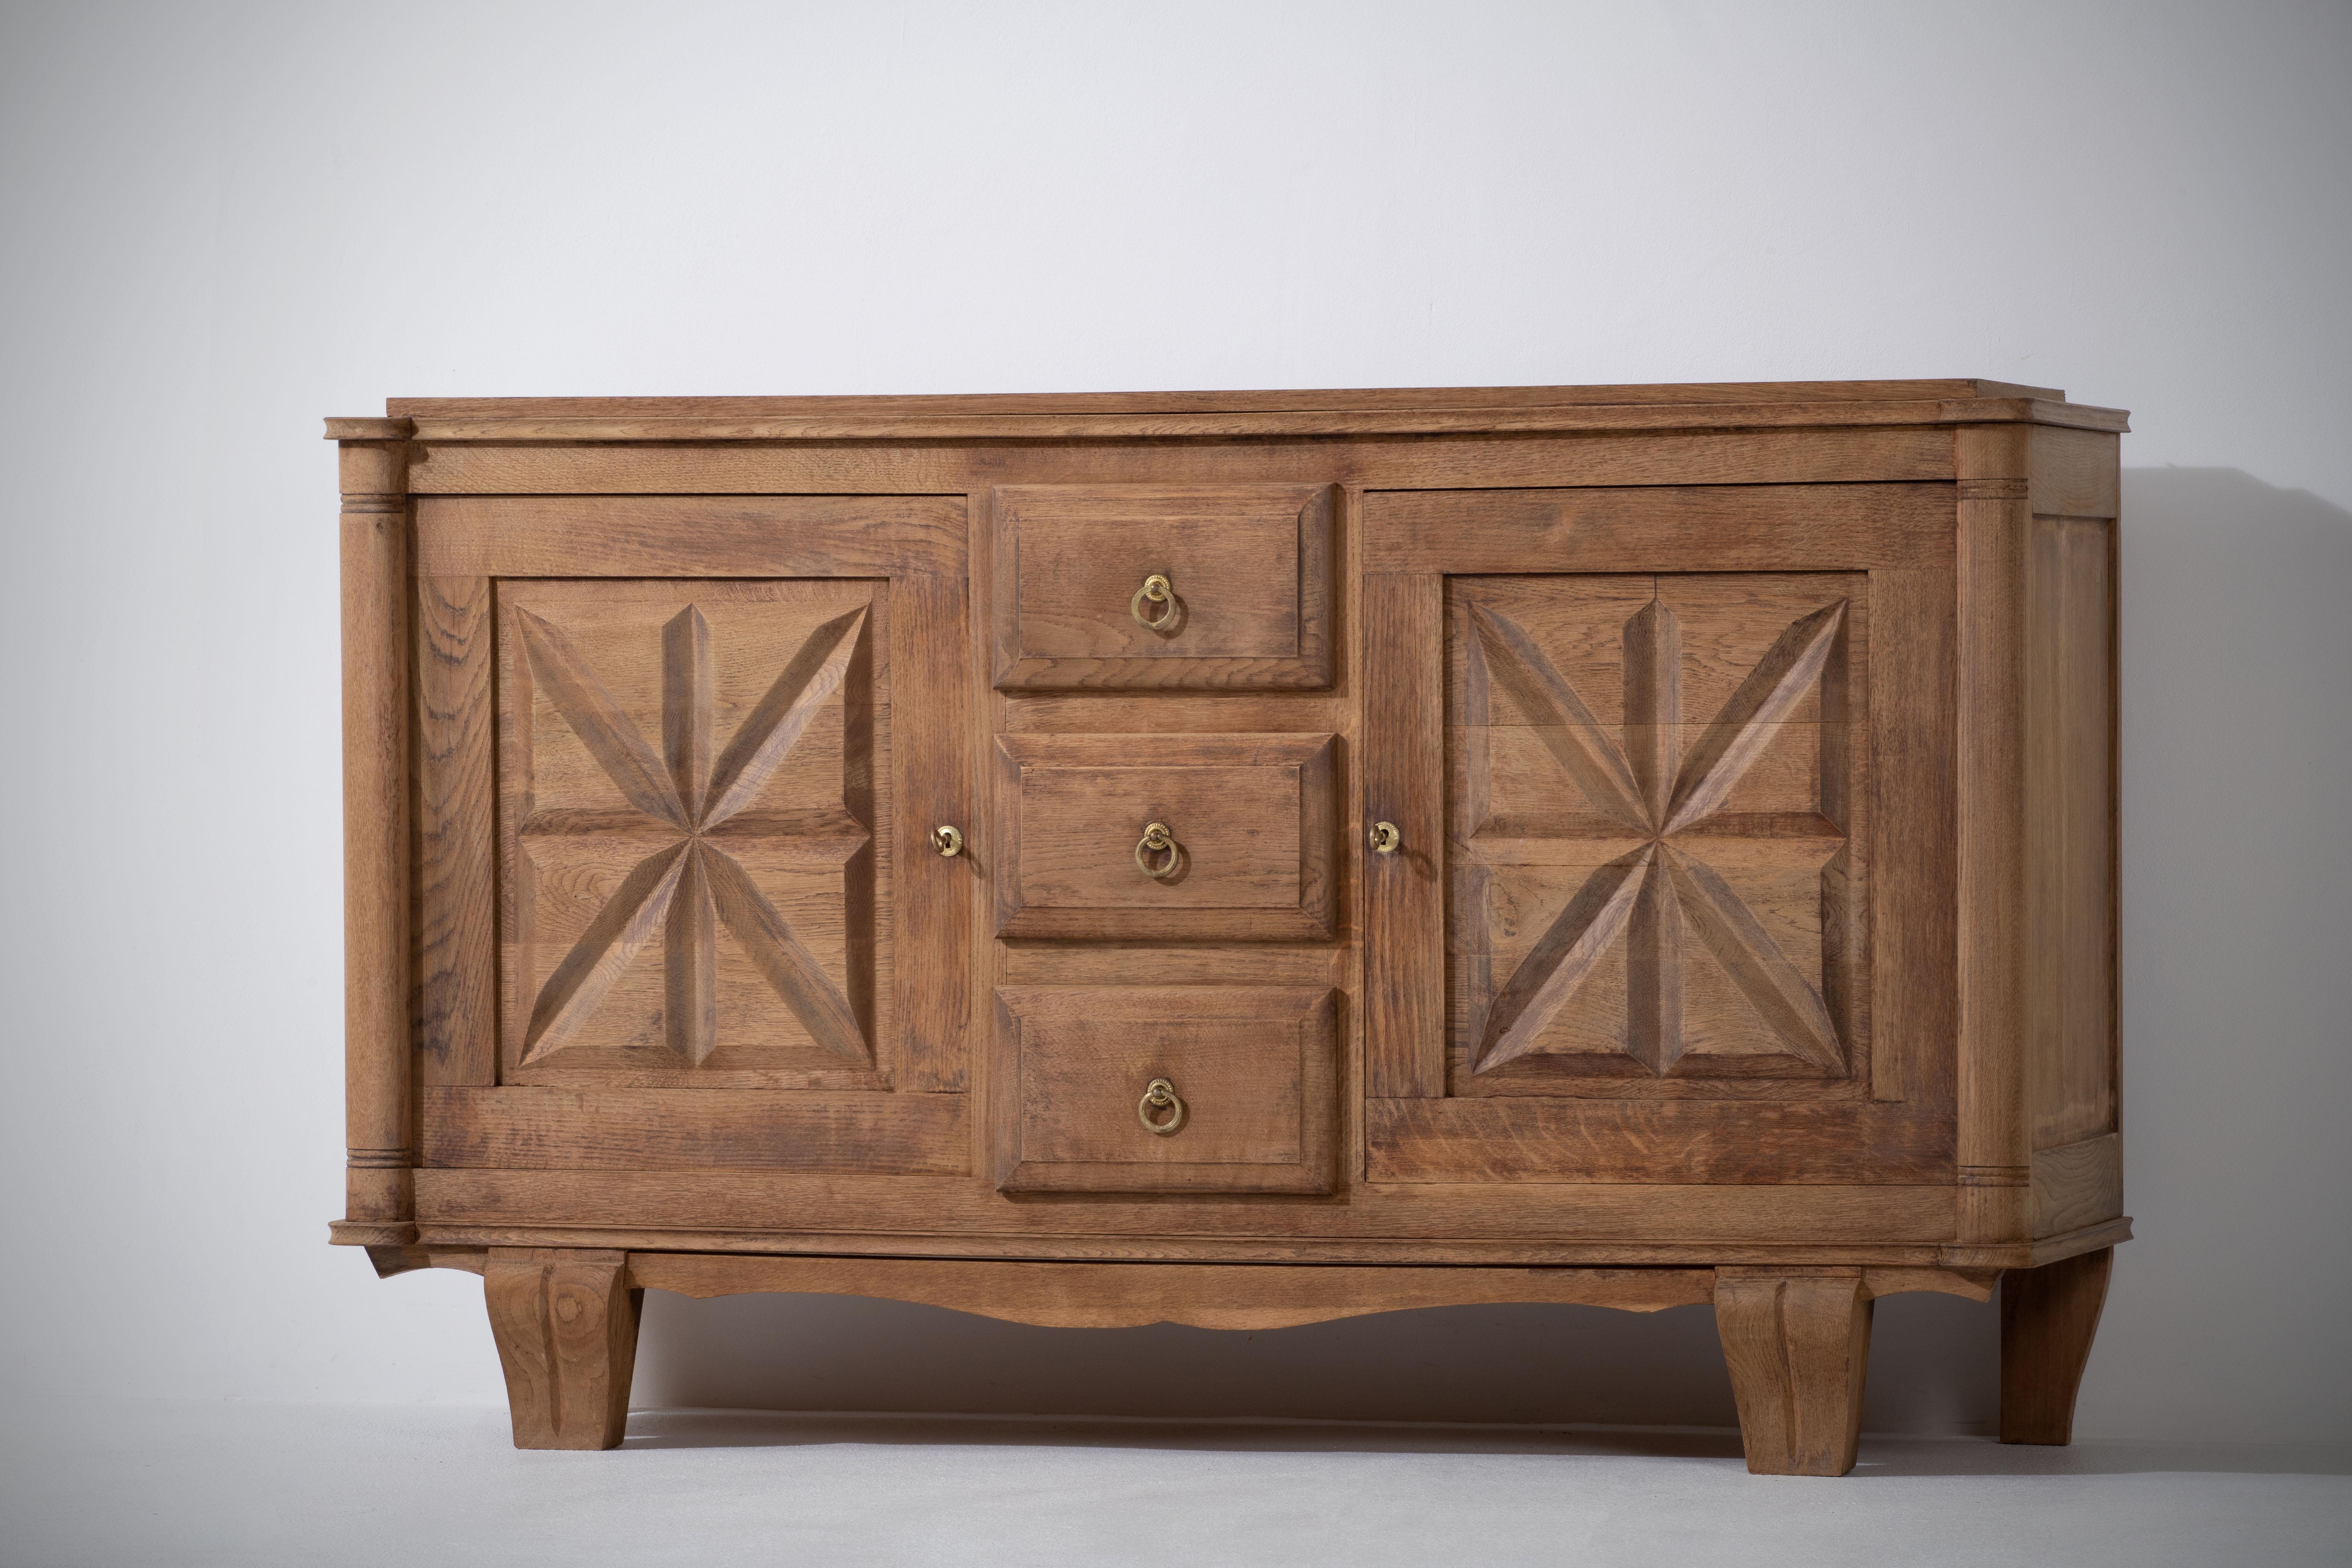 Very elegant cabinet in solid oak, France, 1940s.
The credenza consists of two storage facilities, it is covered with very detailed designed doors. 
Good vintage condition.